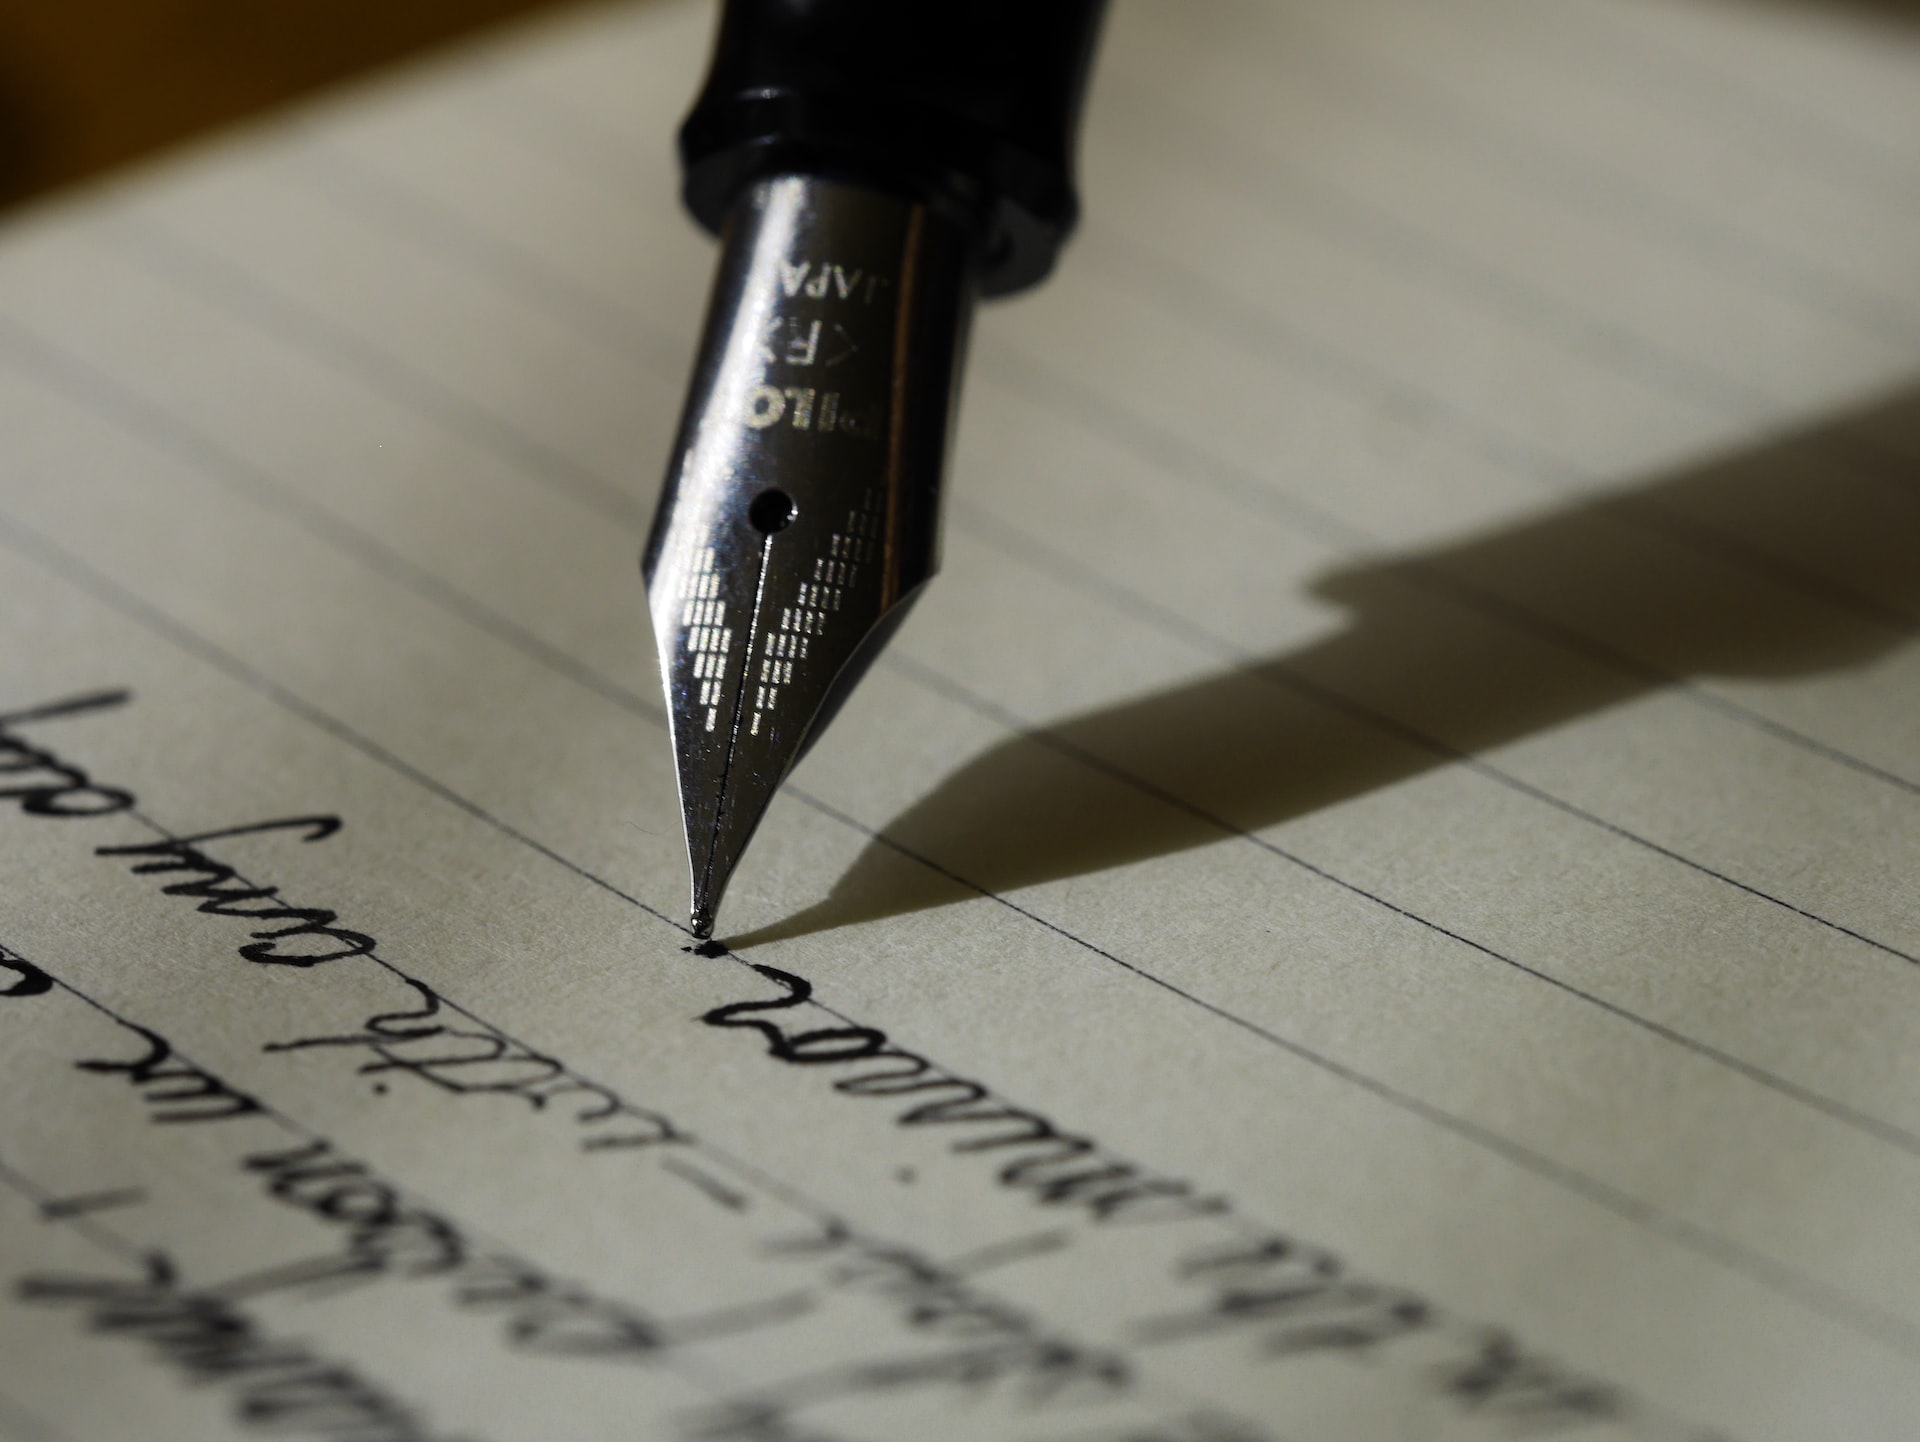 It’s your will, so you should be able to alter it if you wish. However, making handwritten changes to a will isn’t always a wise idea. Here’s why.